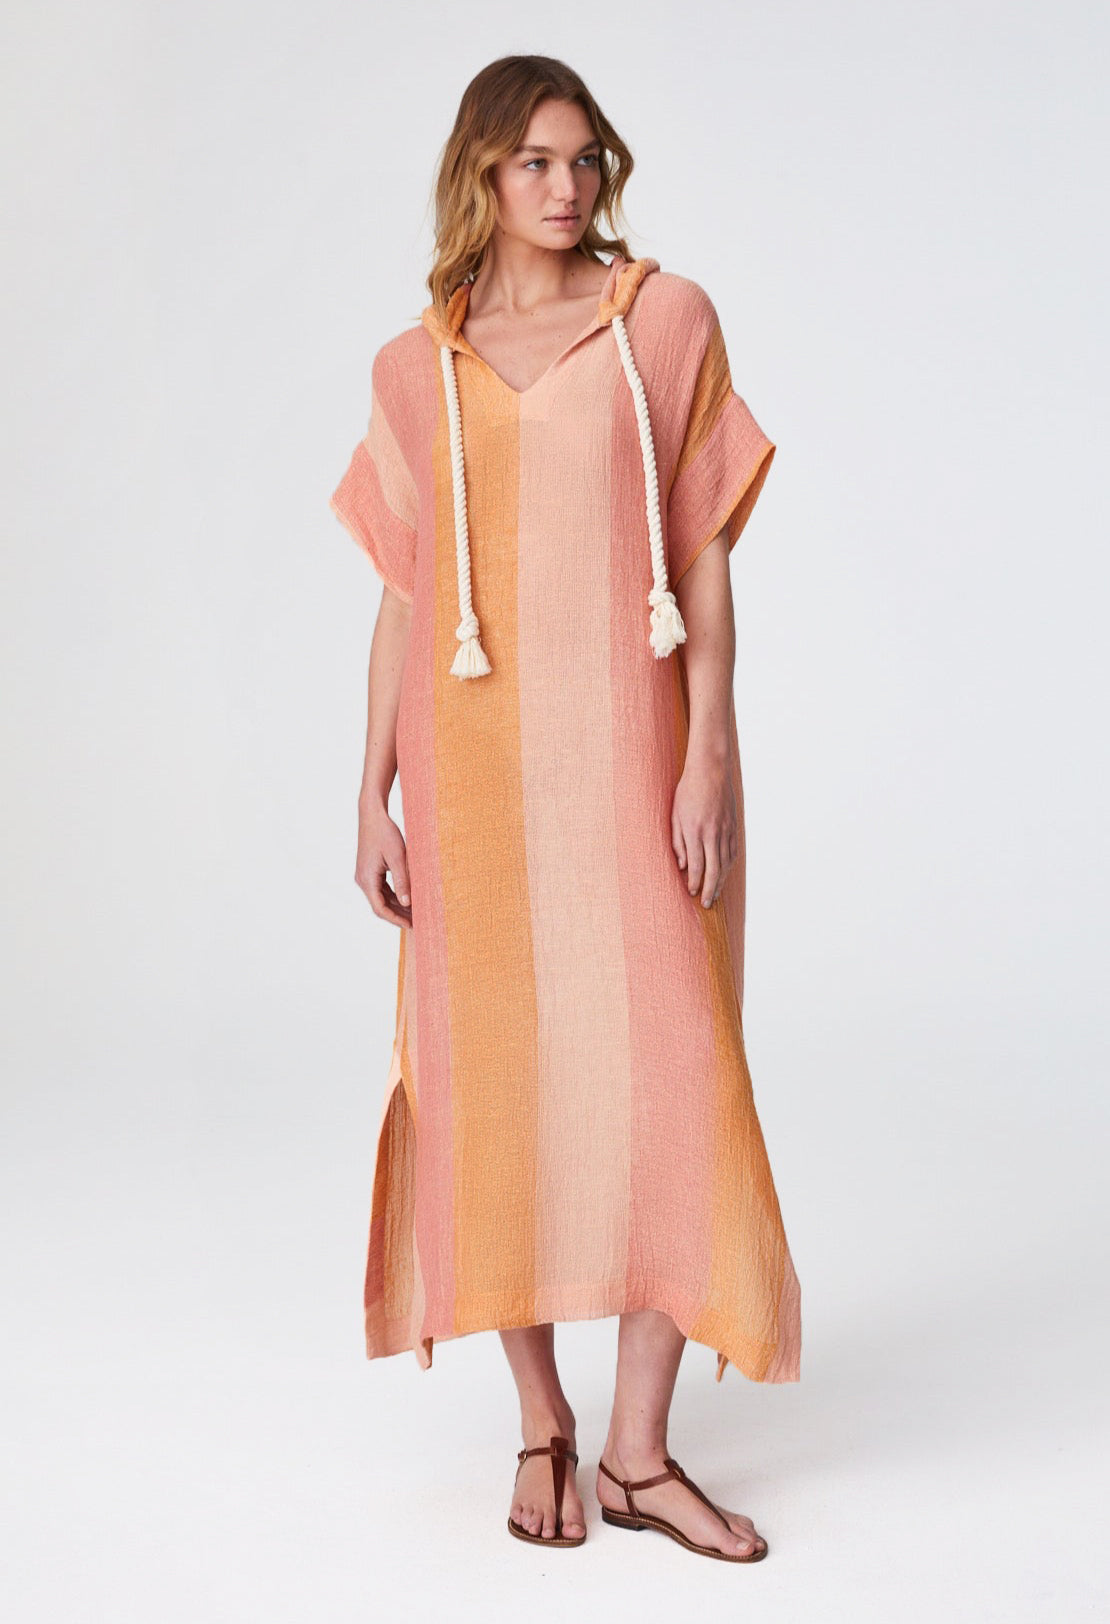 THE DRAWSTRING HOODED CAFTAN in SUNSET AWNING STRIPED GAUZE